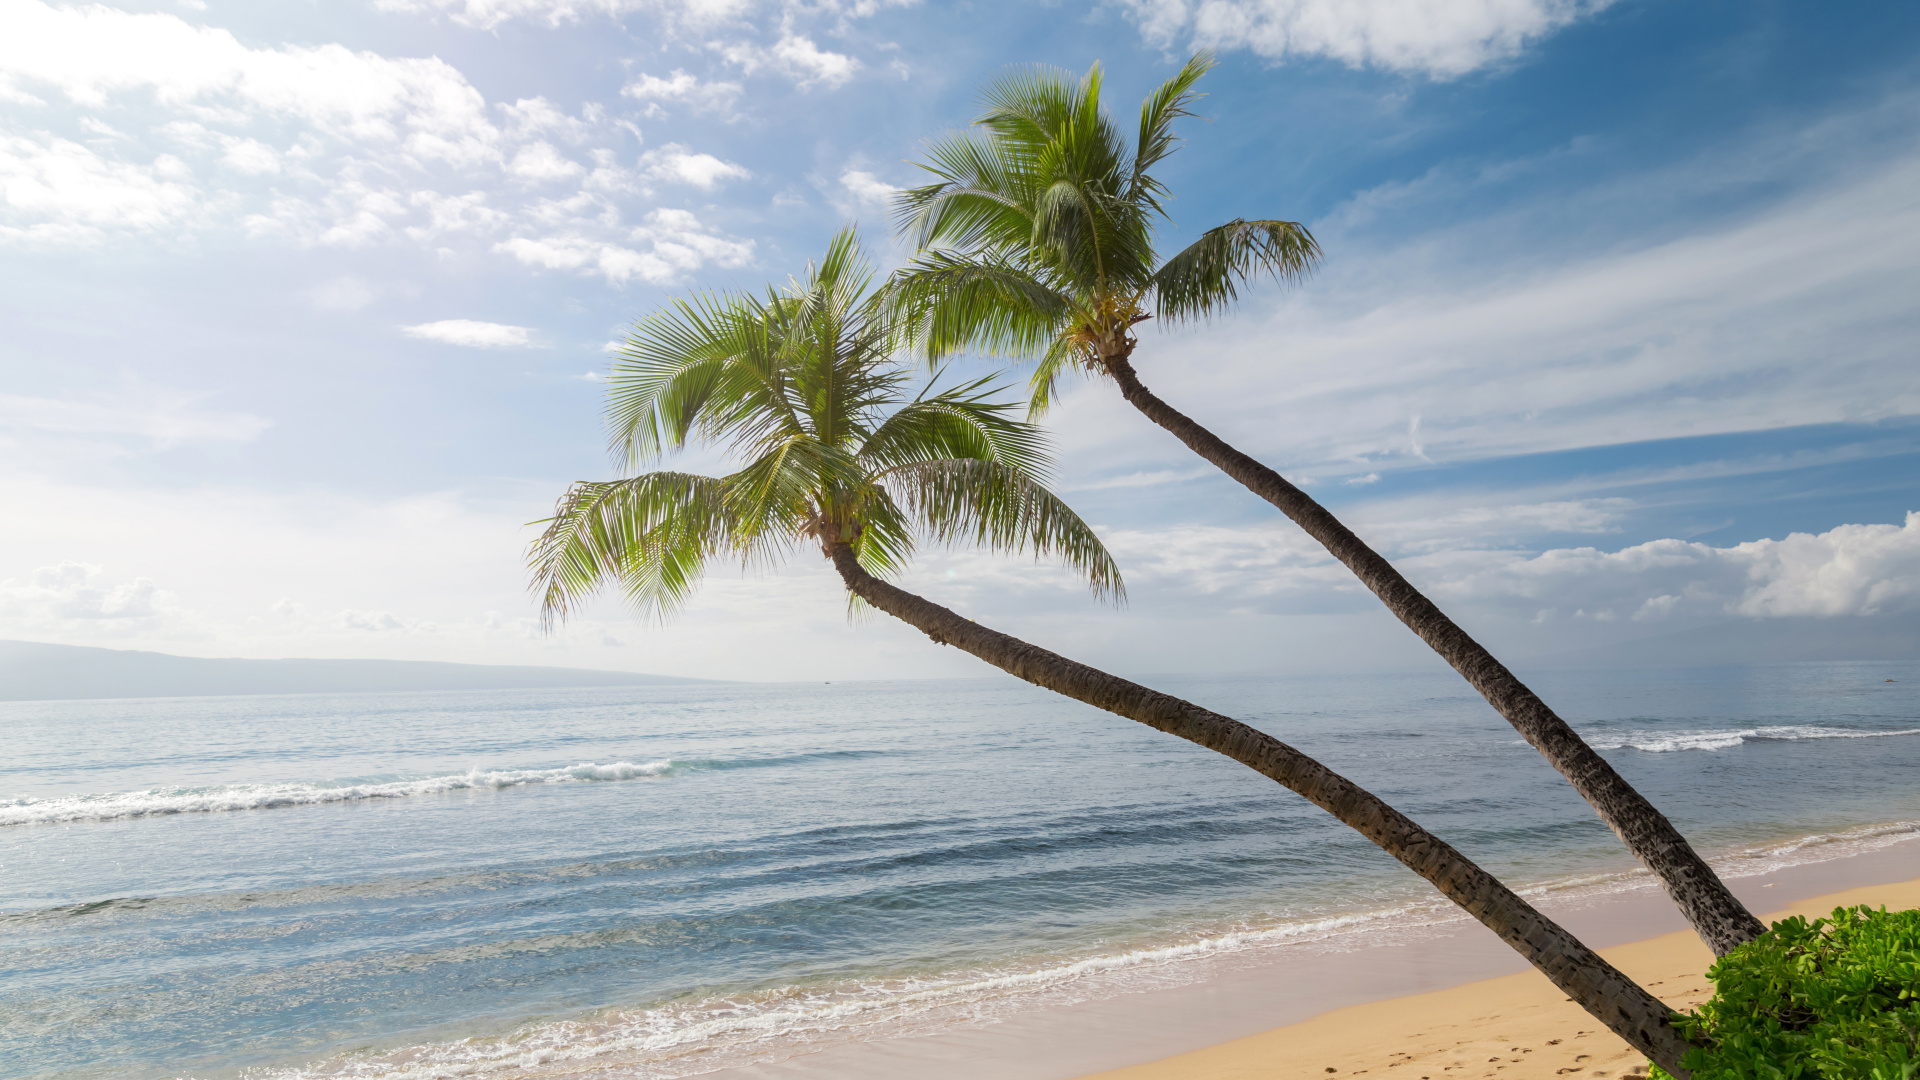 Palm Tree on Beach Shore During Daytime. Wallpaper in 1920x1080 Resolution